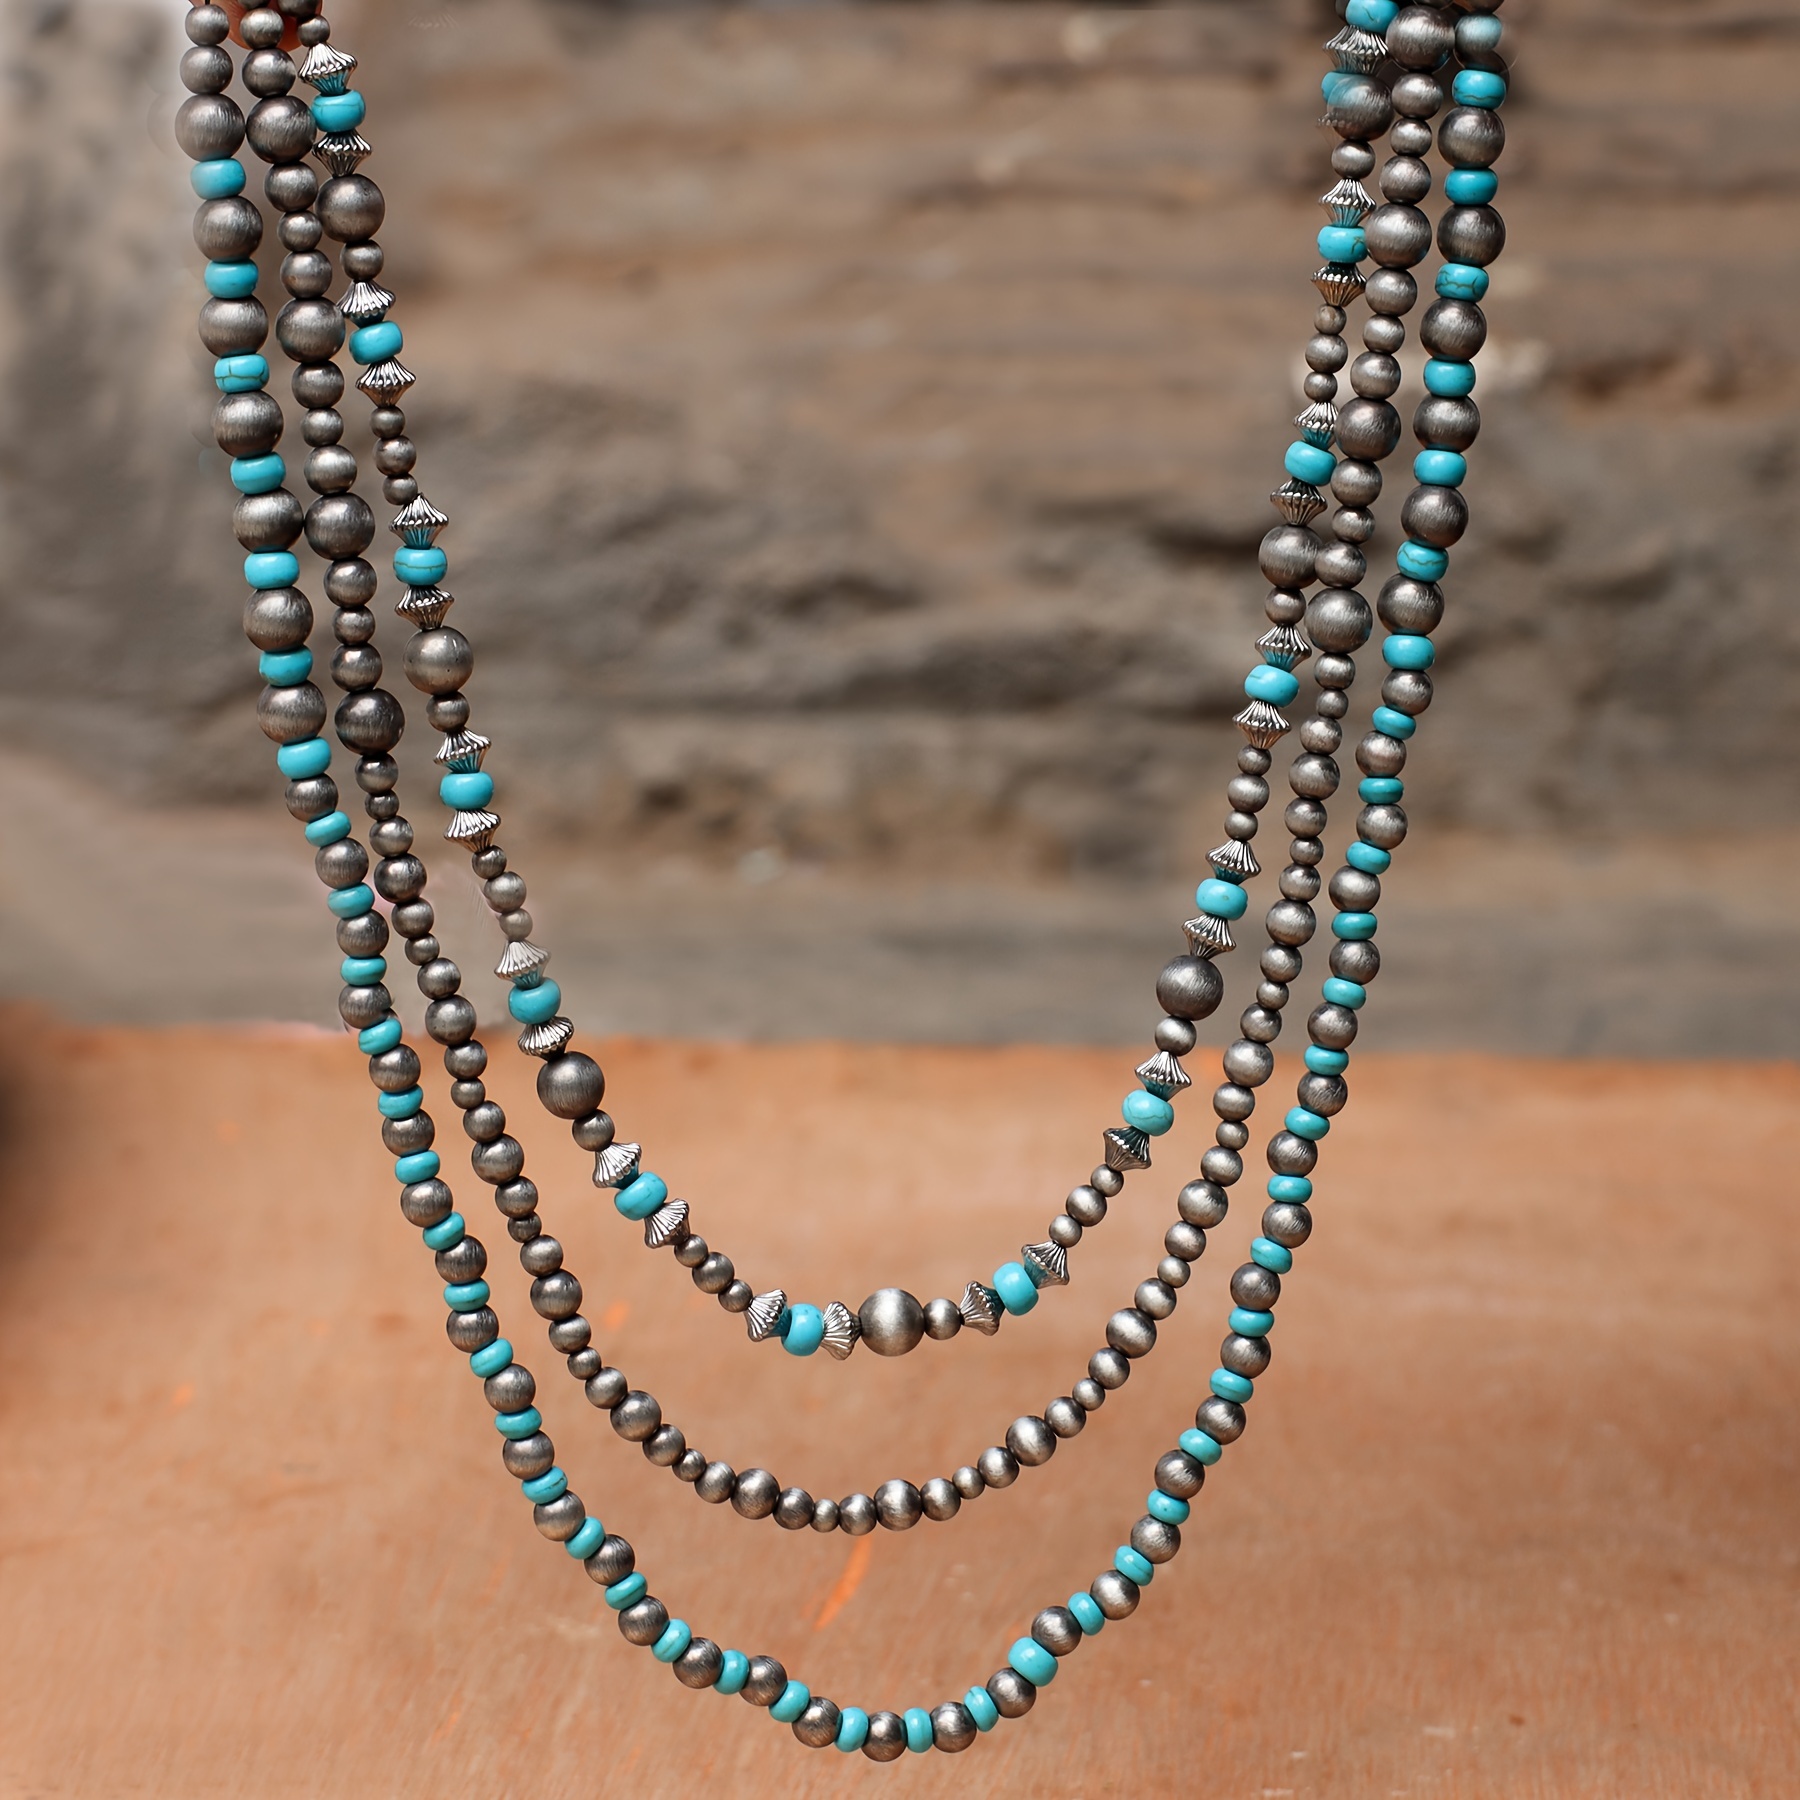 

Antique Silvery Triple-strand Turquoise & Navajo Bead Handcrafted Necklace For Western Ladies, Vintage Bohemian Style, Daily Wear, Perfect Gift For